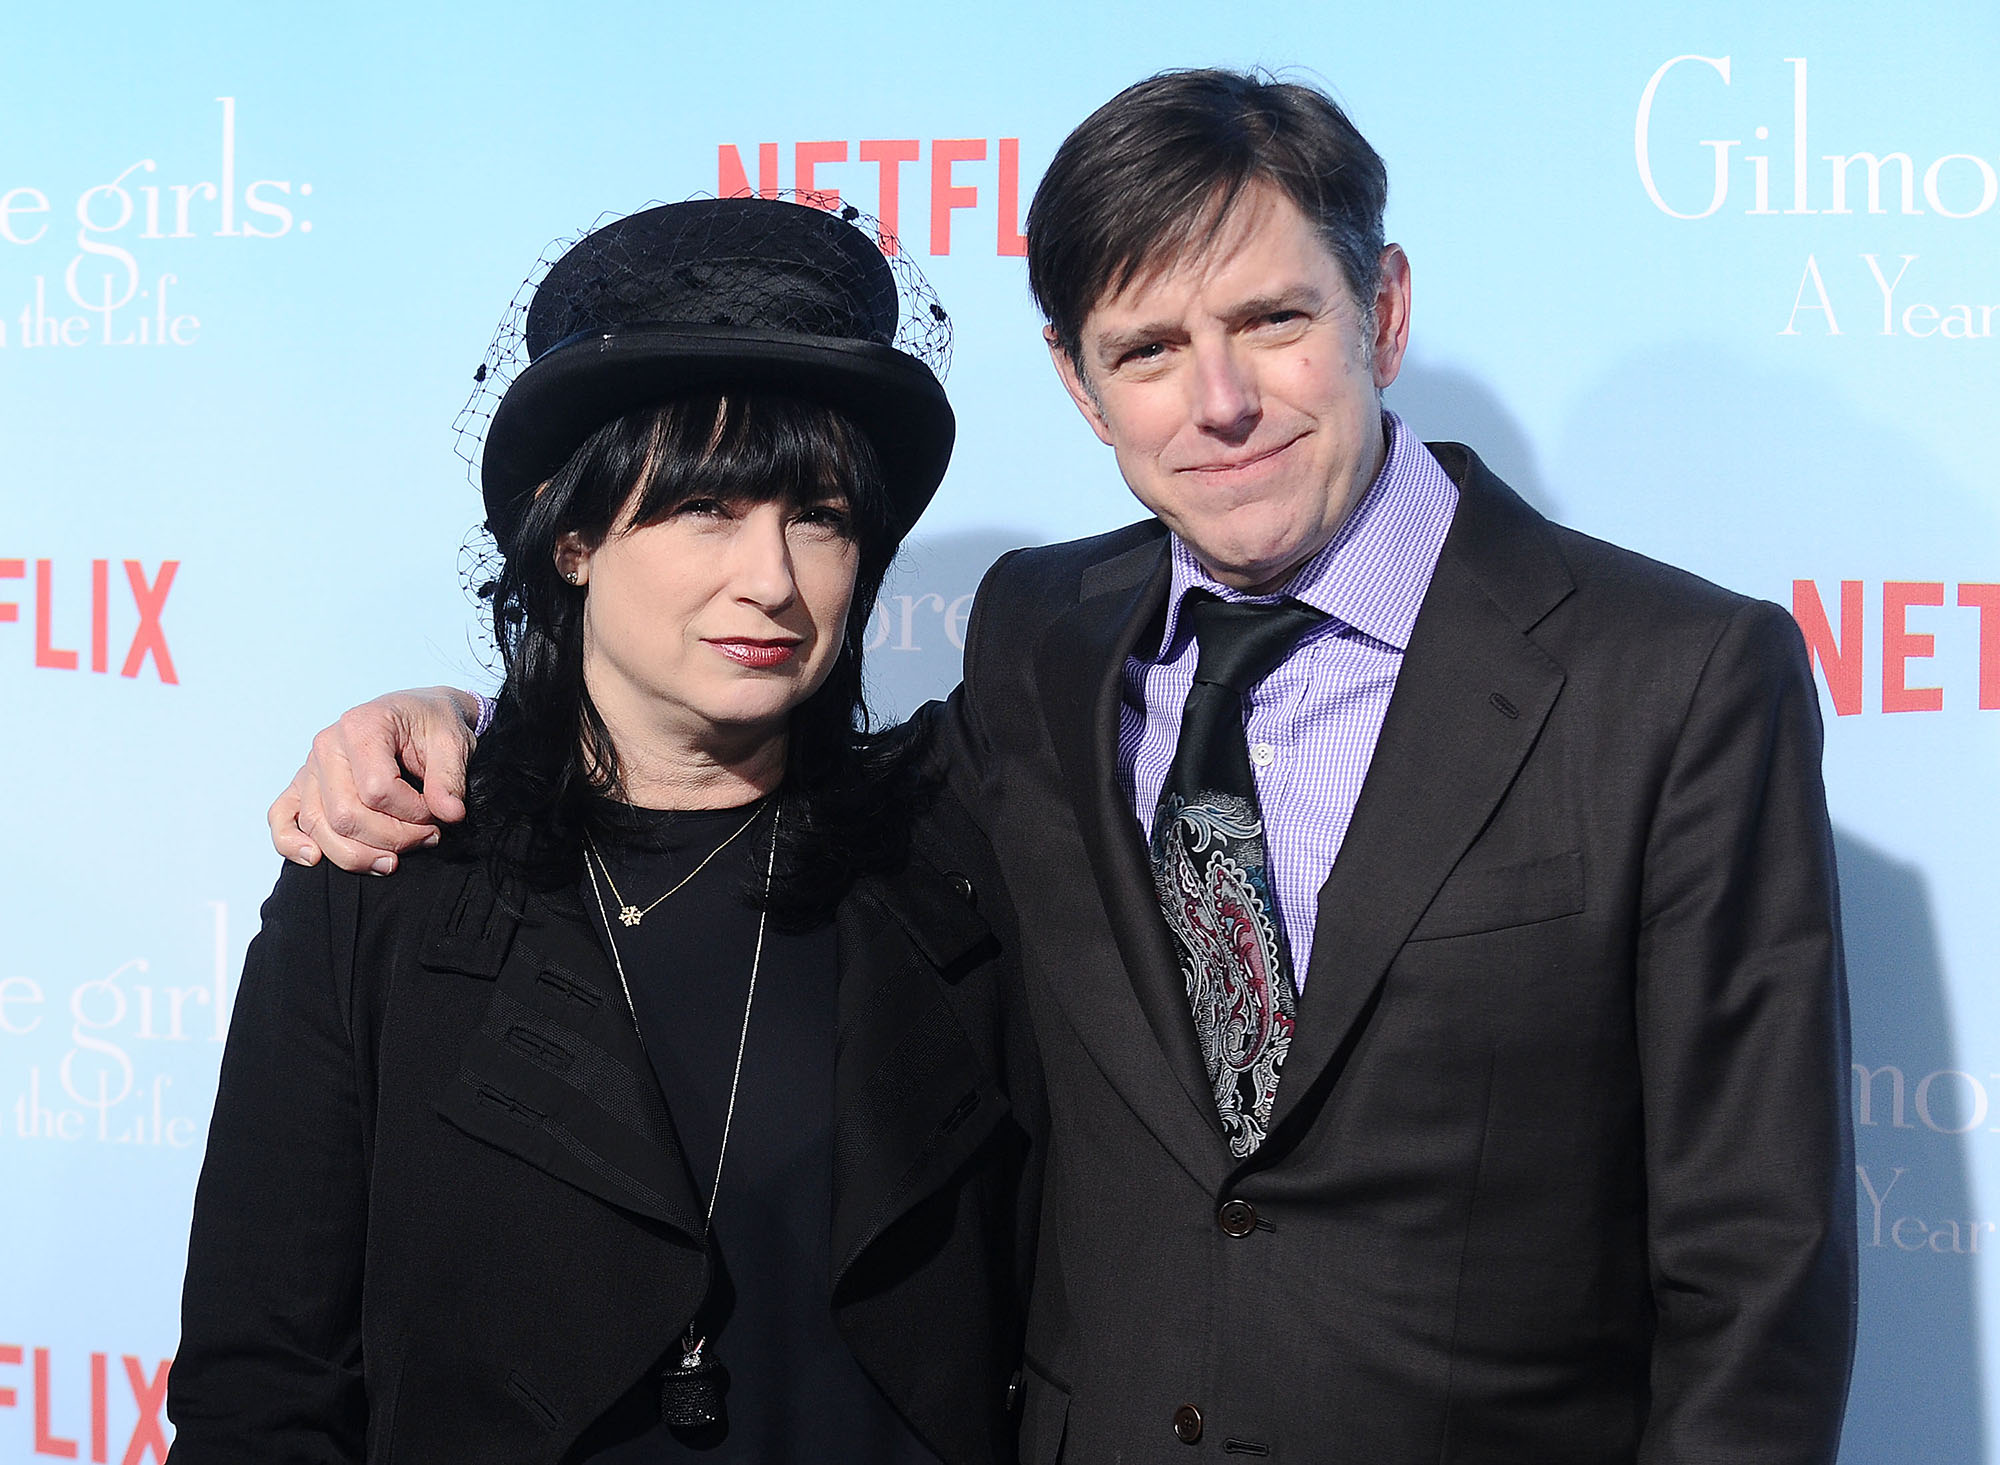 Amy Sherman-Palladino and Daniel Palladino attend the premiere of "Gilmore Girls: A Year in the Life" in Los Angeles, California. (Photo by Jason LaVeris/FilmMagic) (Jason LaVeris&mdash;FilmMagic)